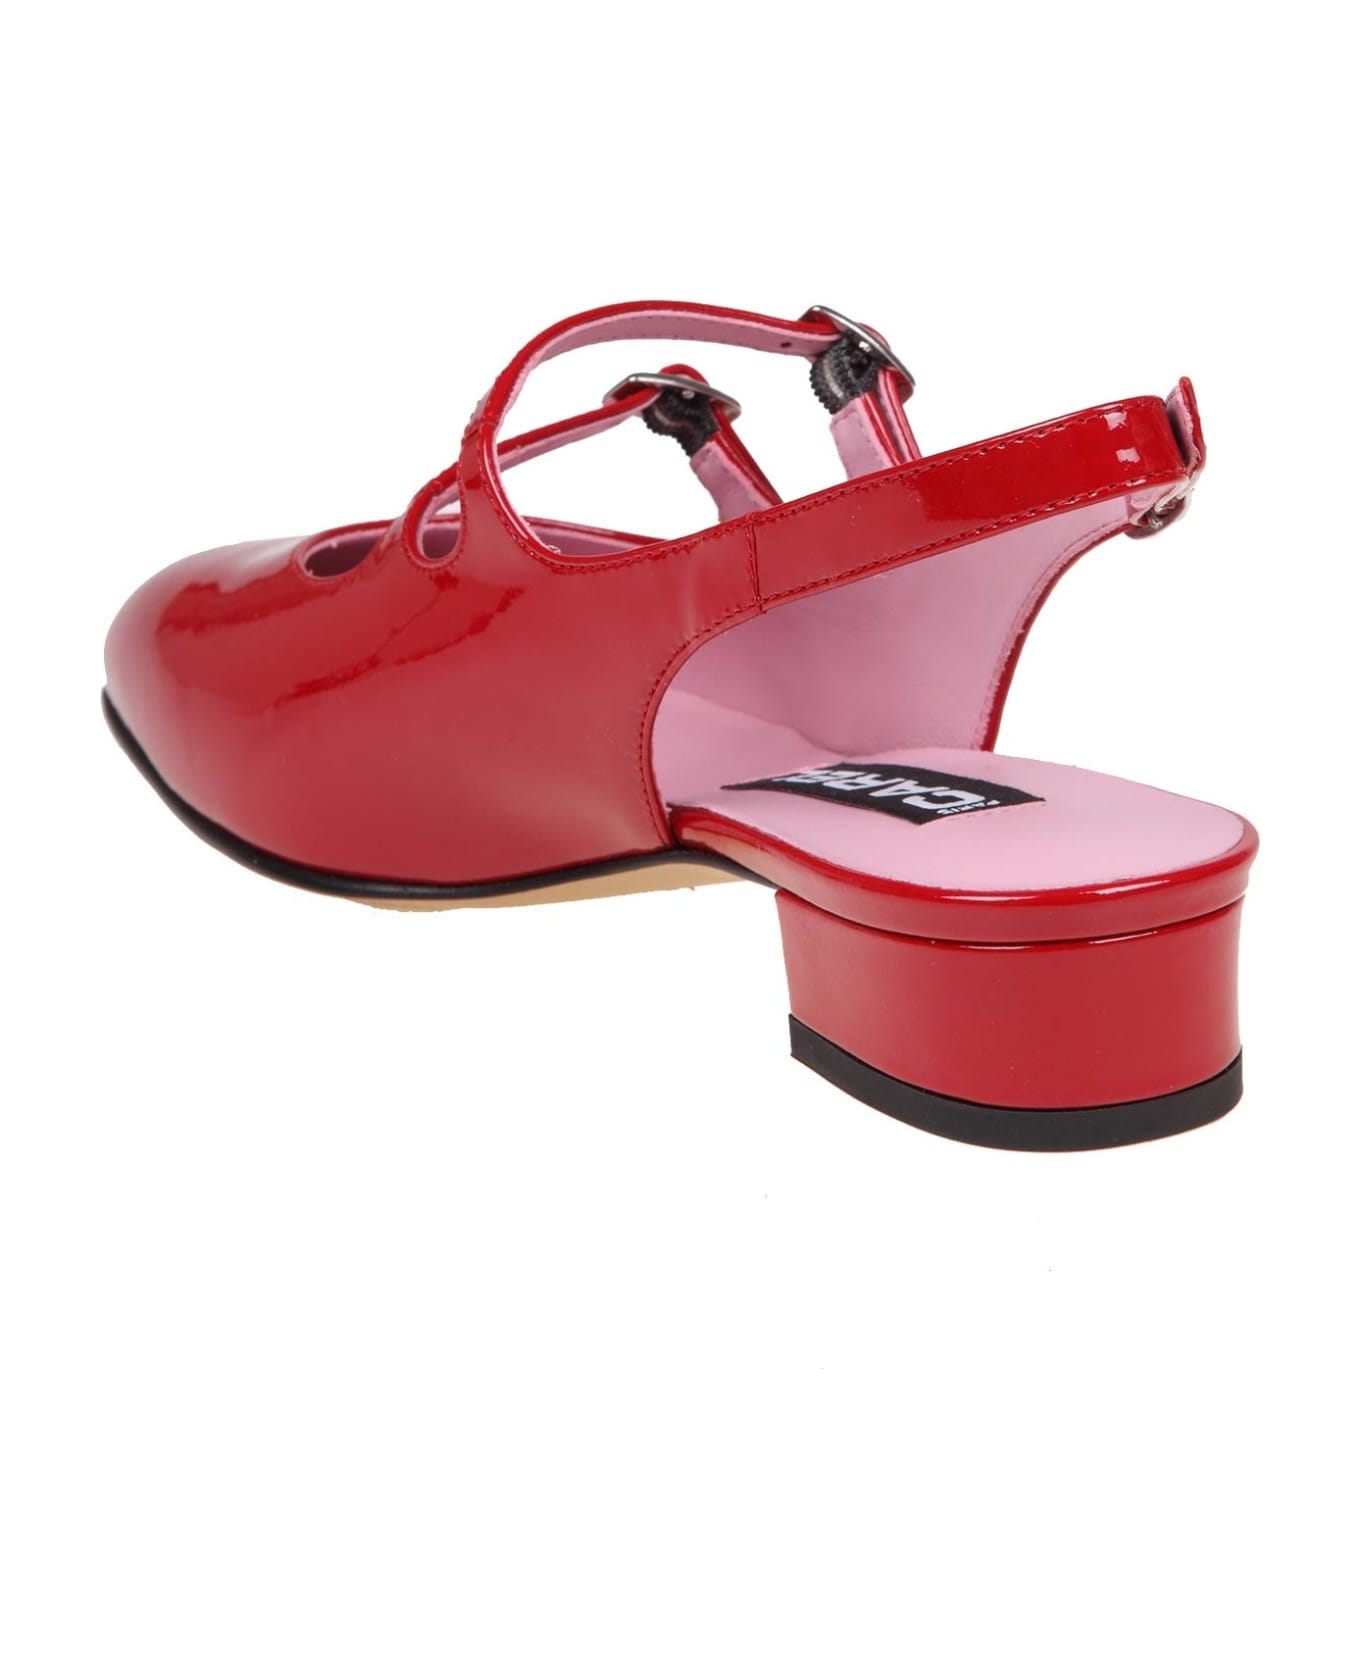 Carel Slingback In Red Patent Leather - Red